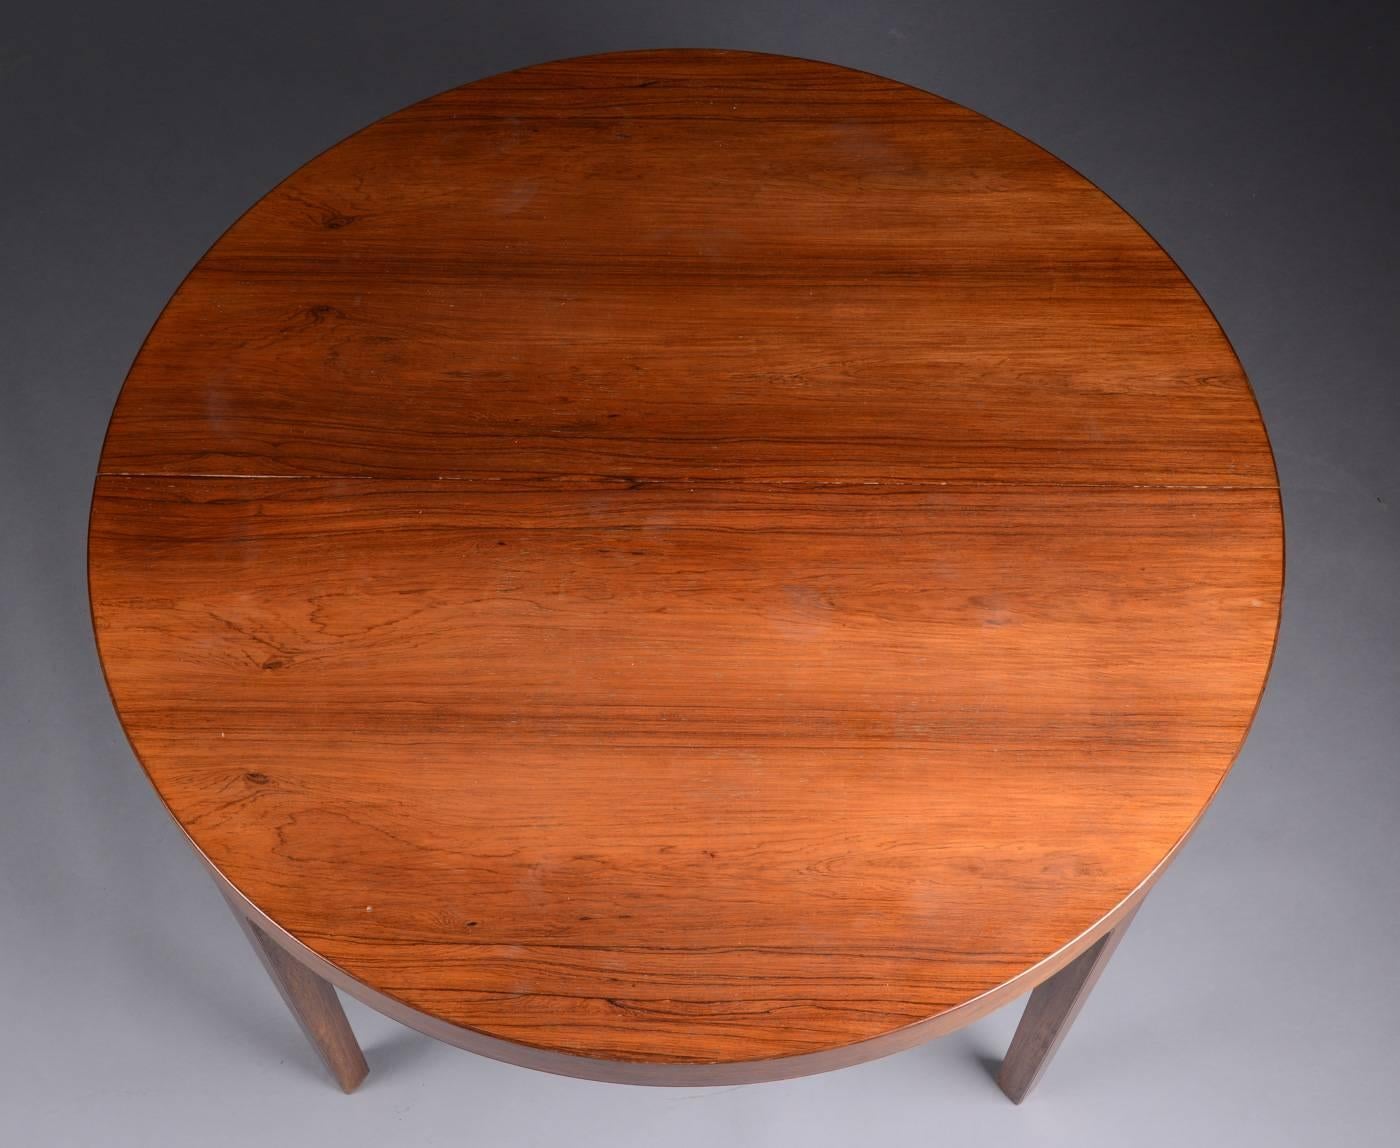 Danish 1960s extending dining table of nicely figured rosewood, circa 1960s, by Designer Ole Wanscher. The table is 49